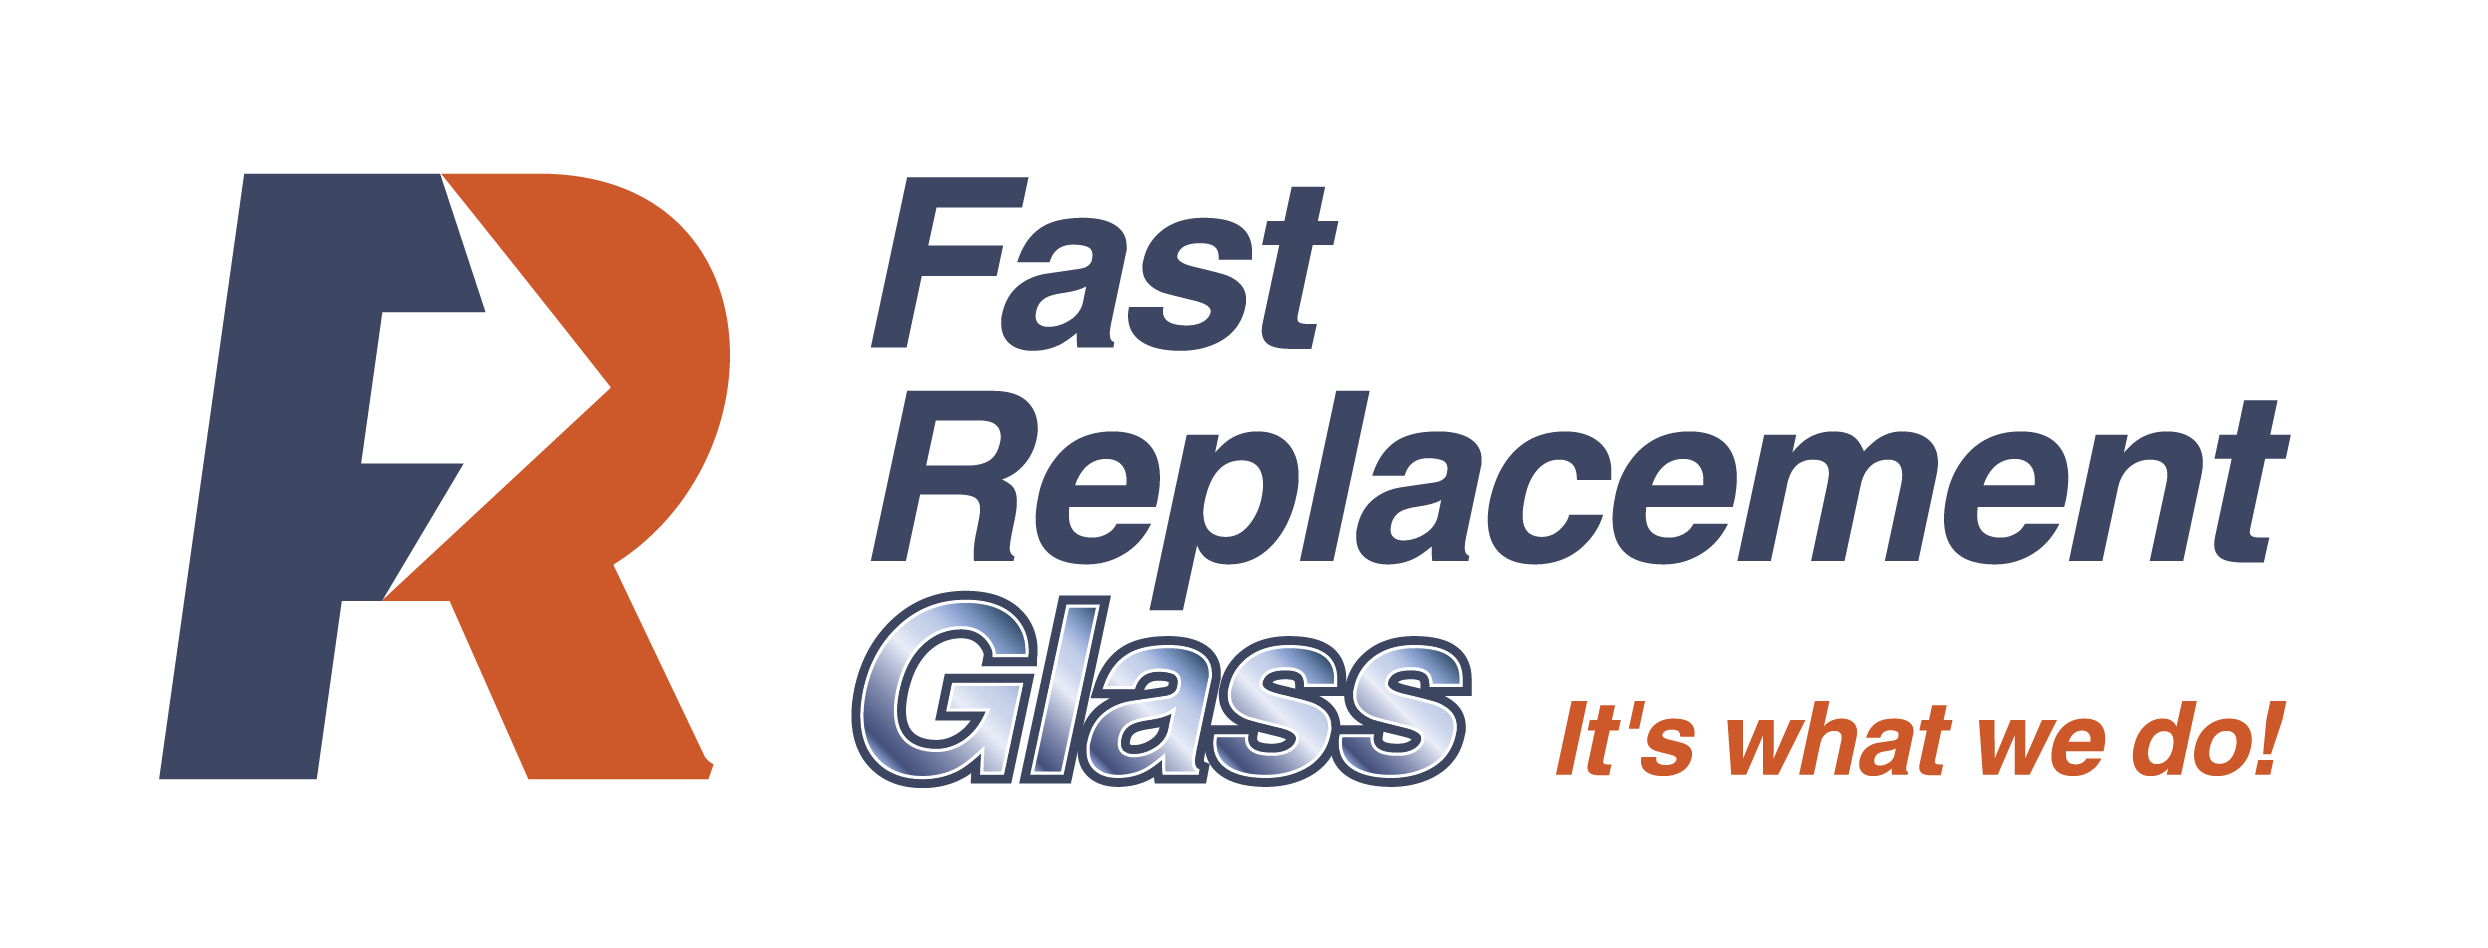 Fast Replacement Glass